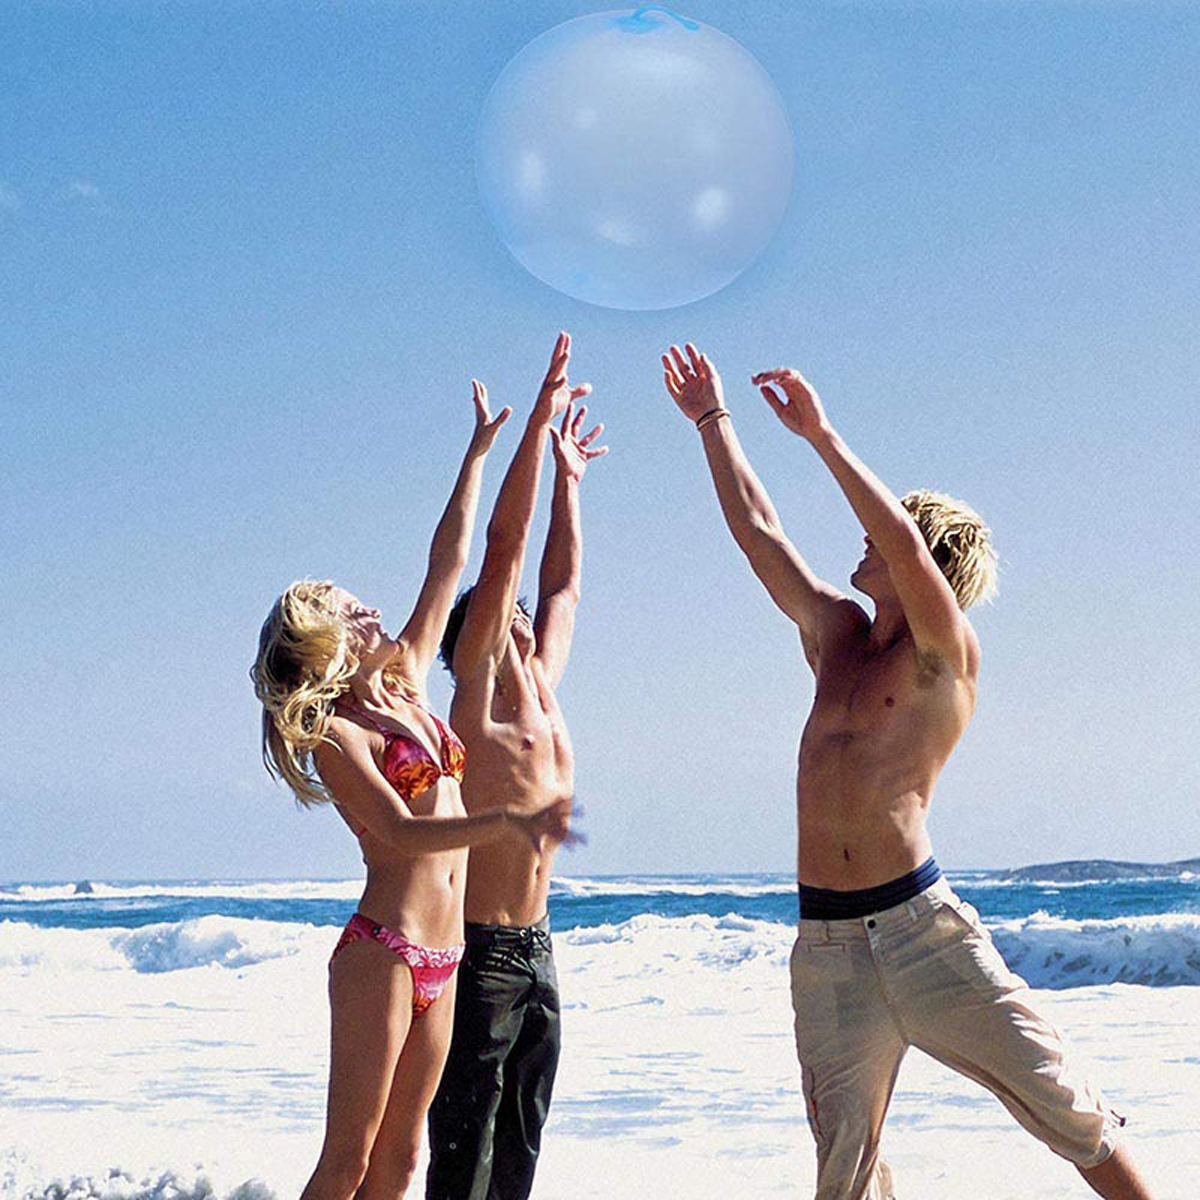 120CM-Multi-color-Bubble-Ball-Inflatable-Filling-Water-Giant-Ball-Toys-for-Kids-Play-Gift-1891654-10